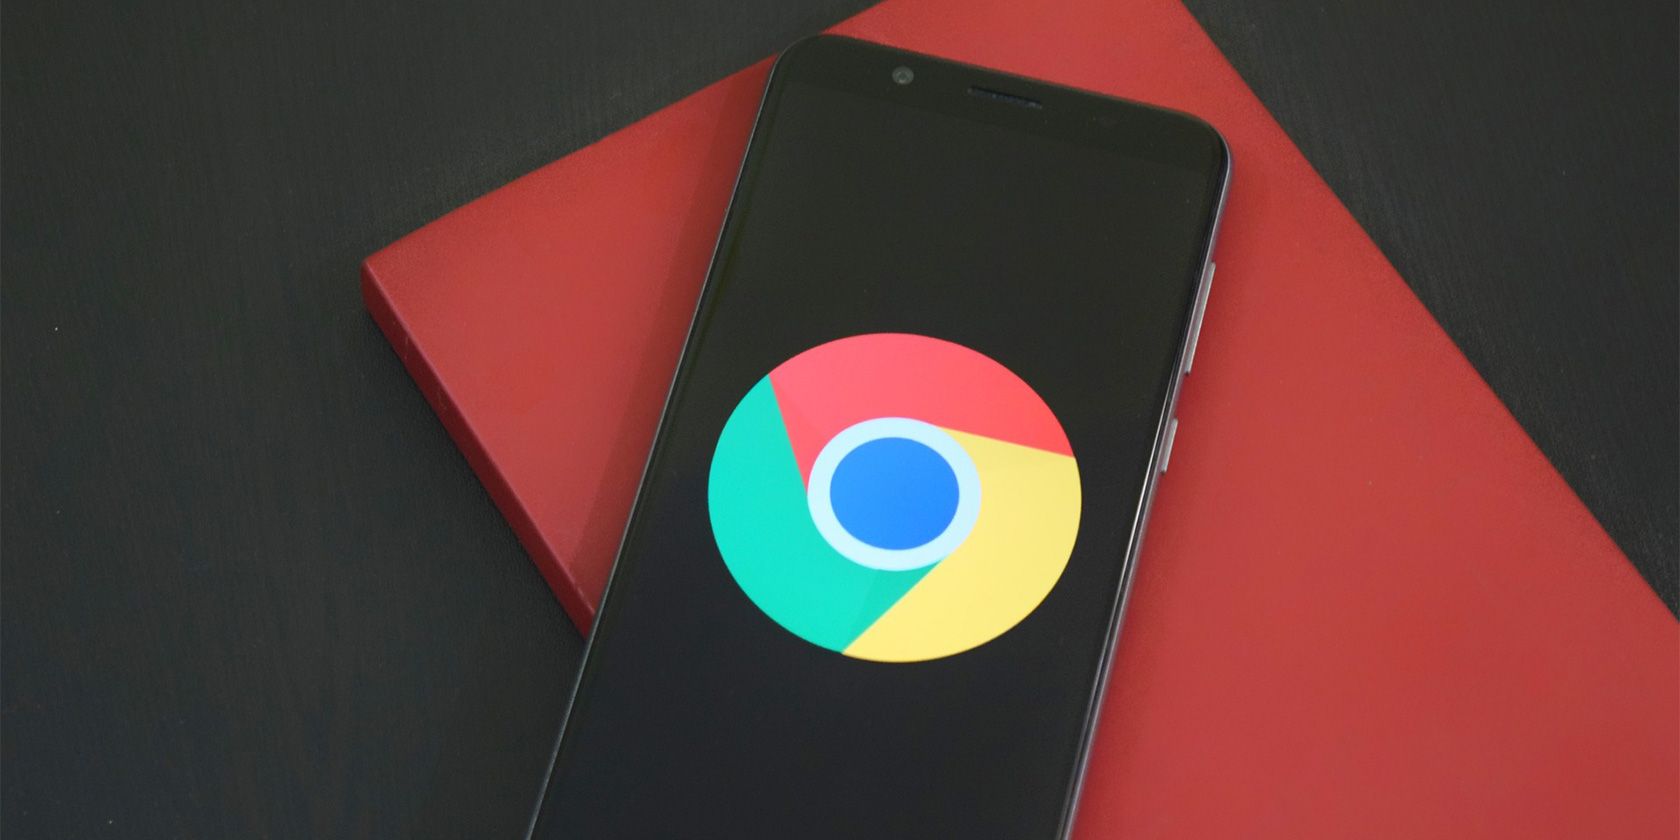 Chrome for Android gets a screenshot tool